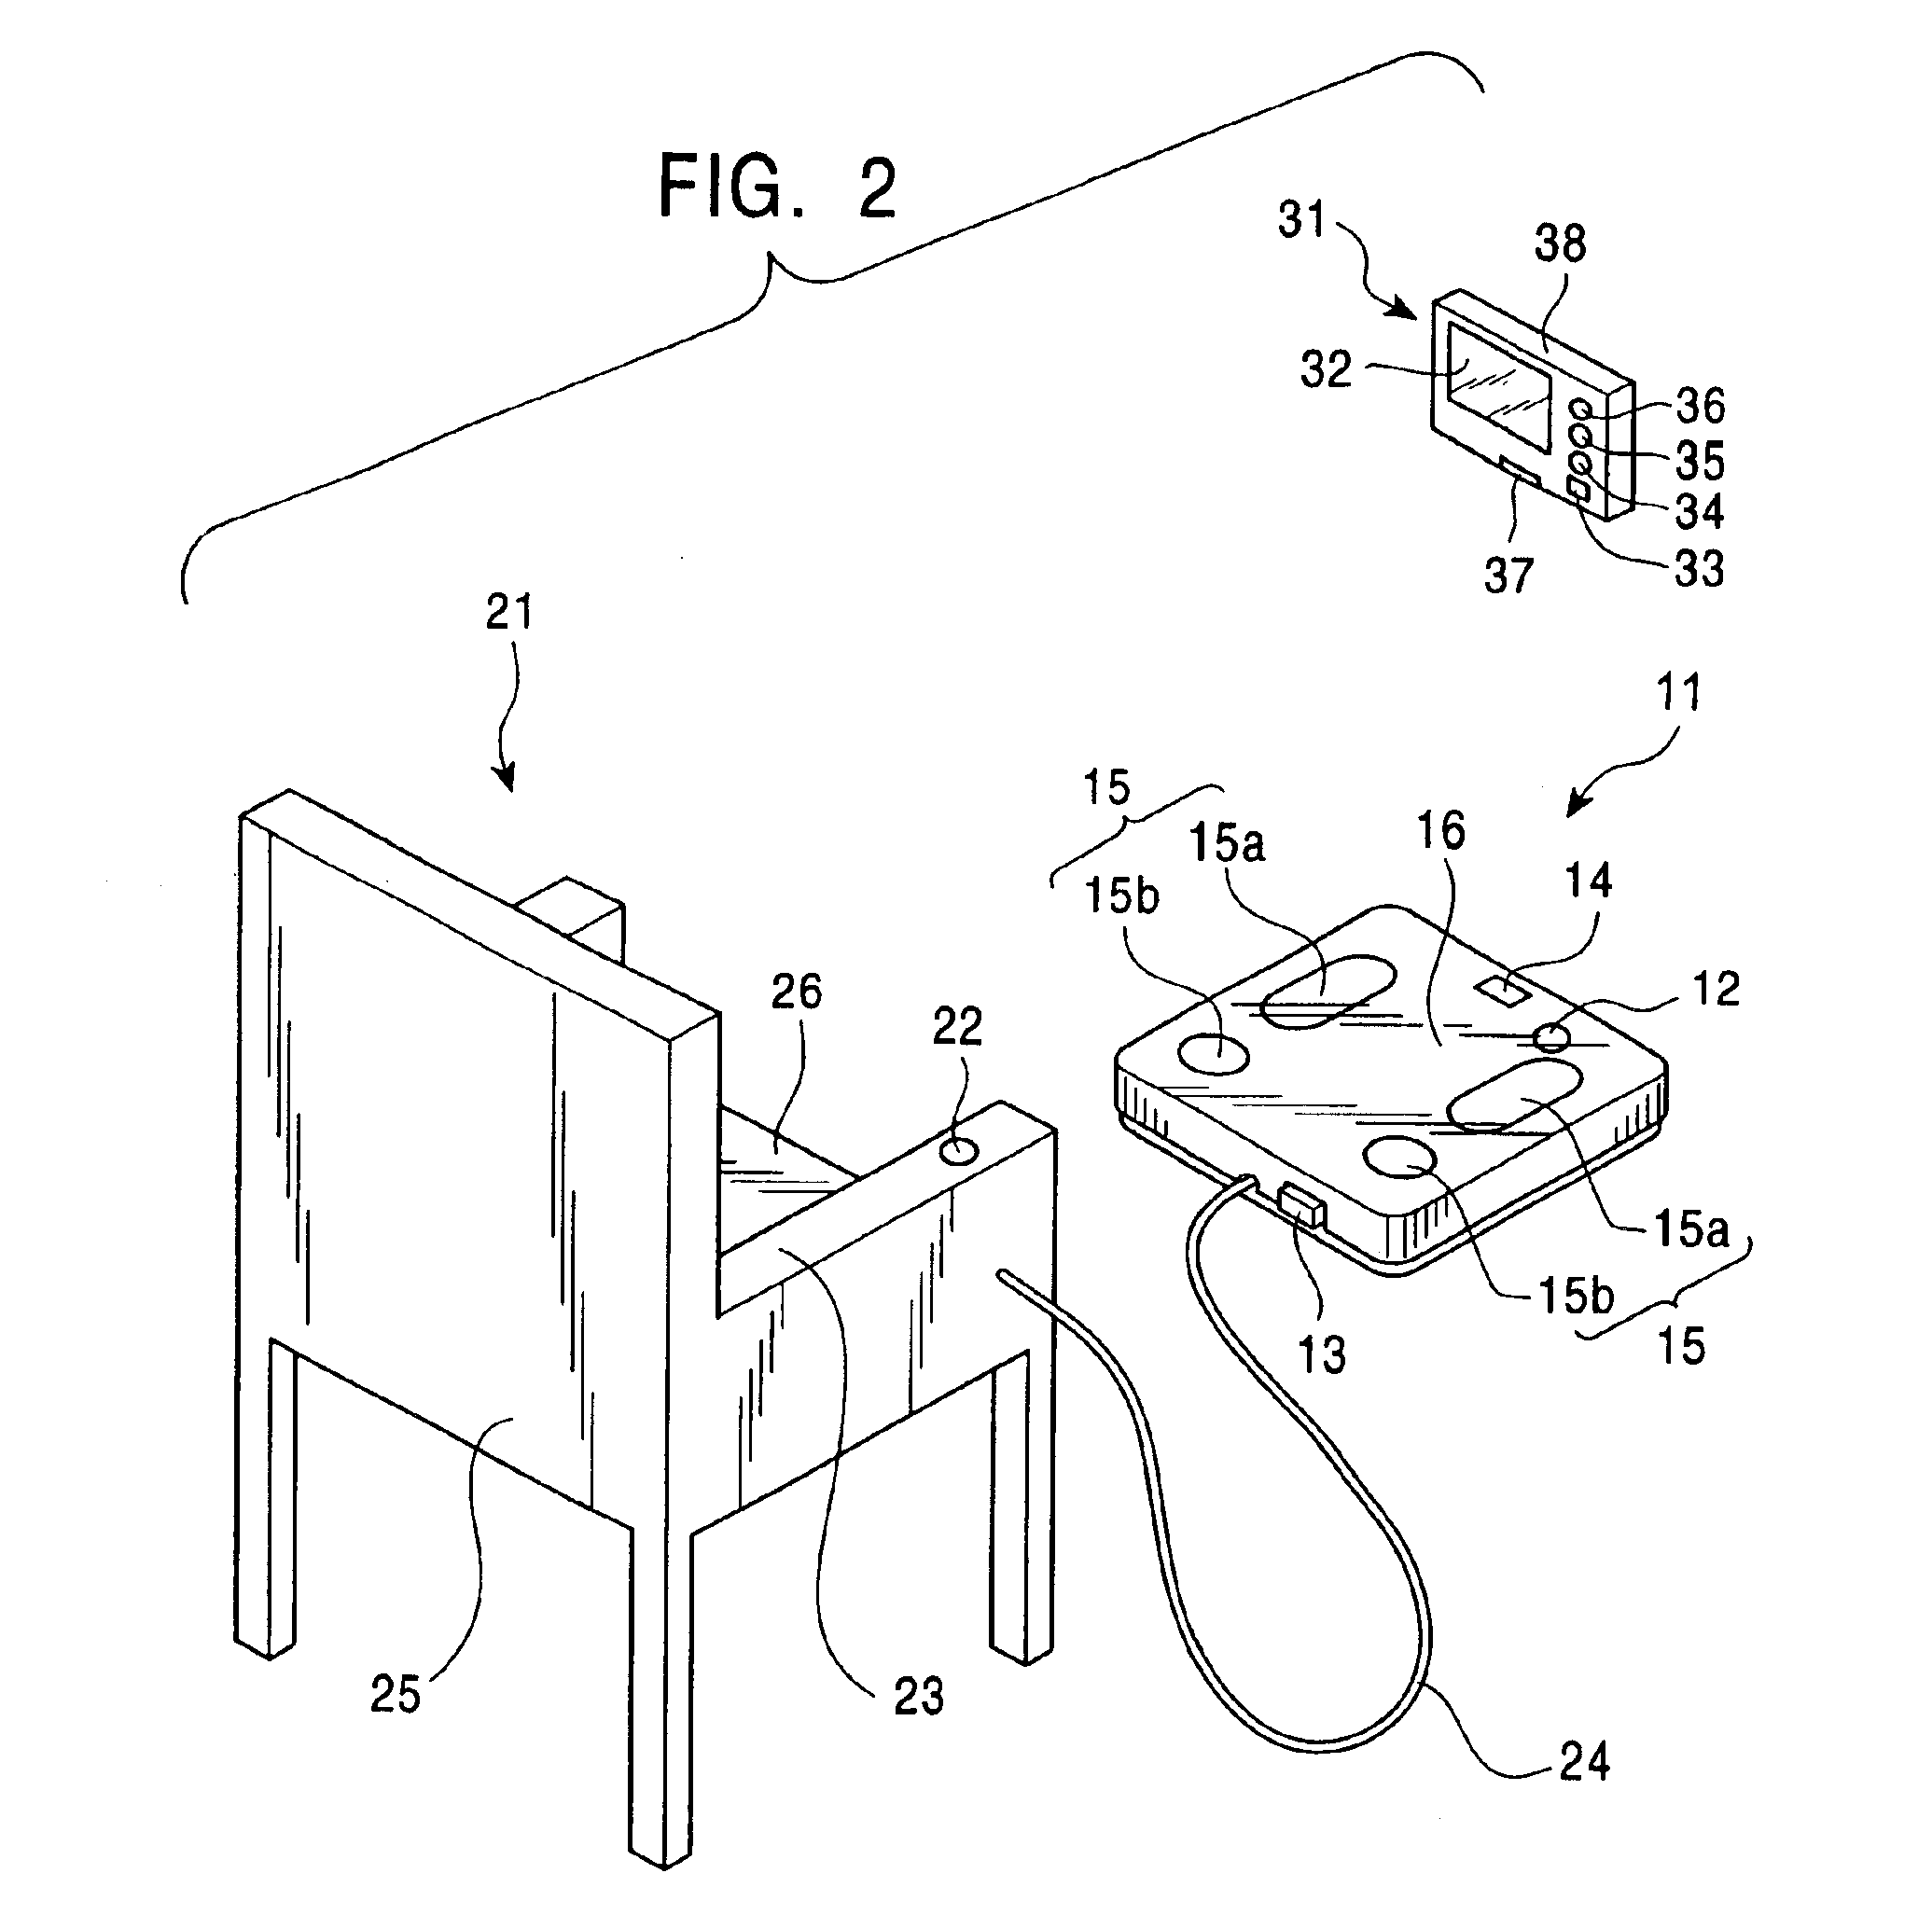 Daily-life disability related physical information determining apparatus